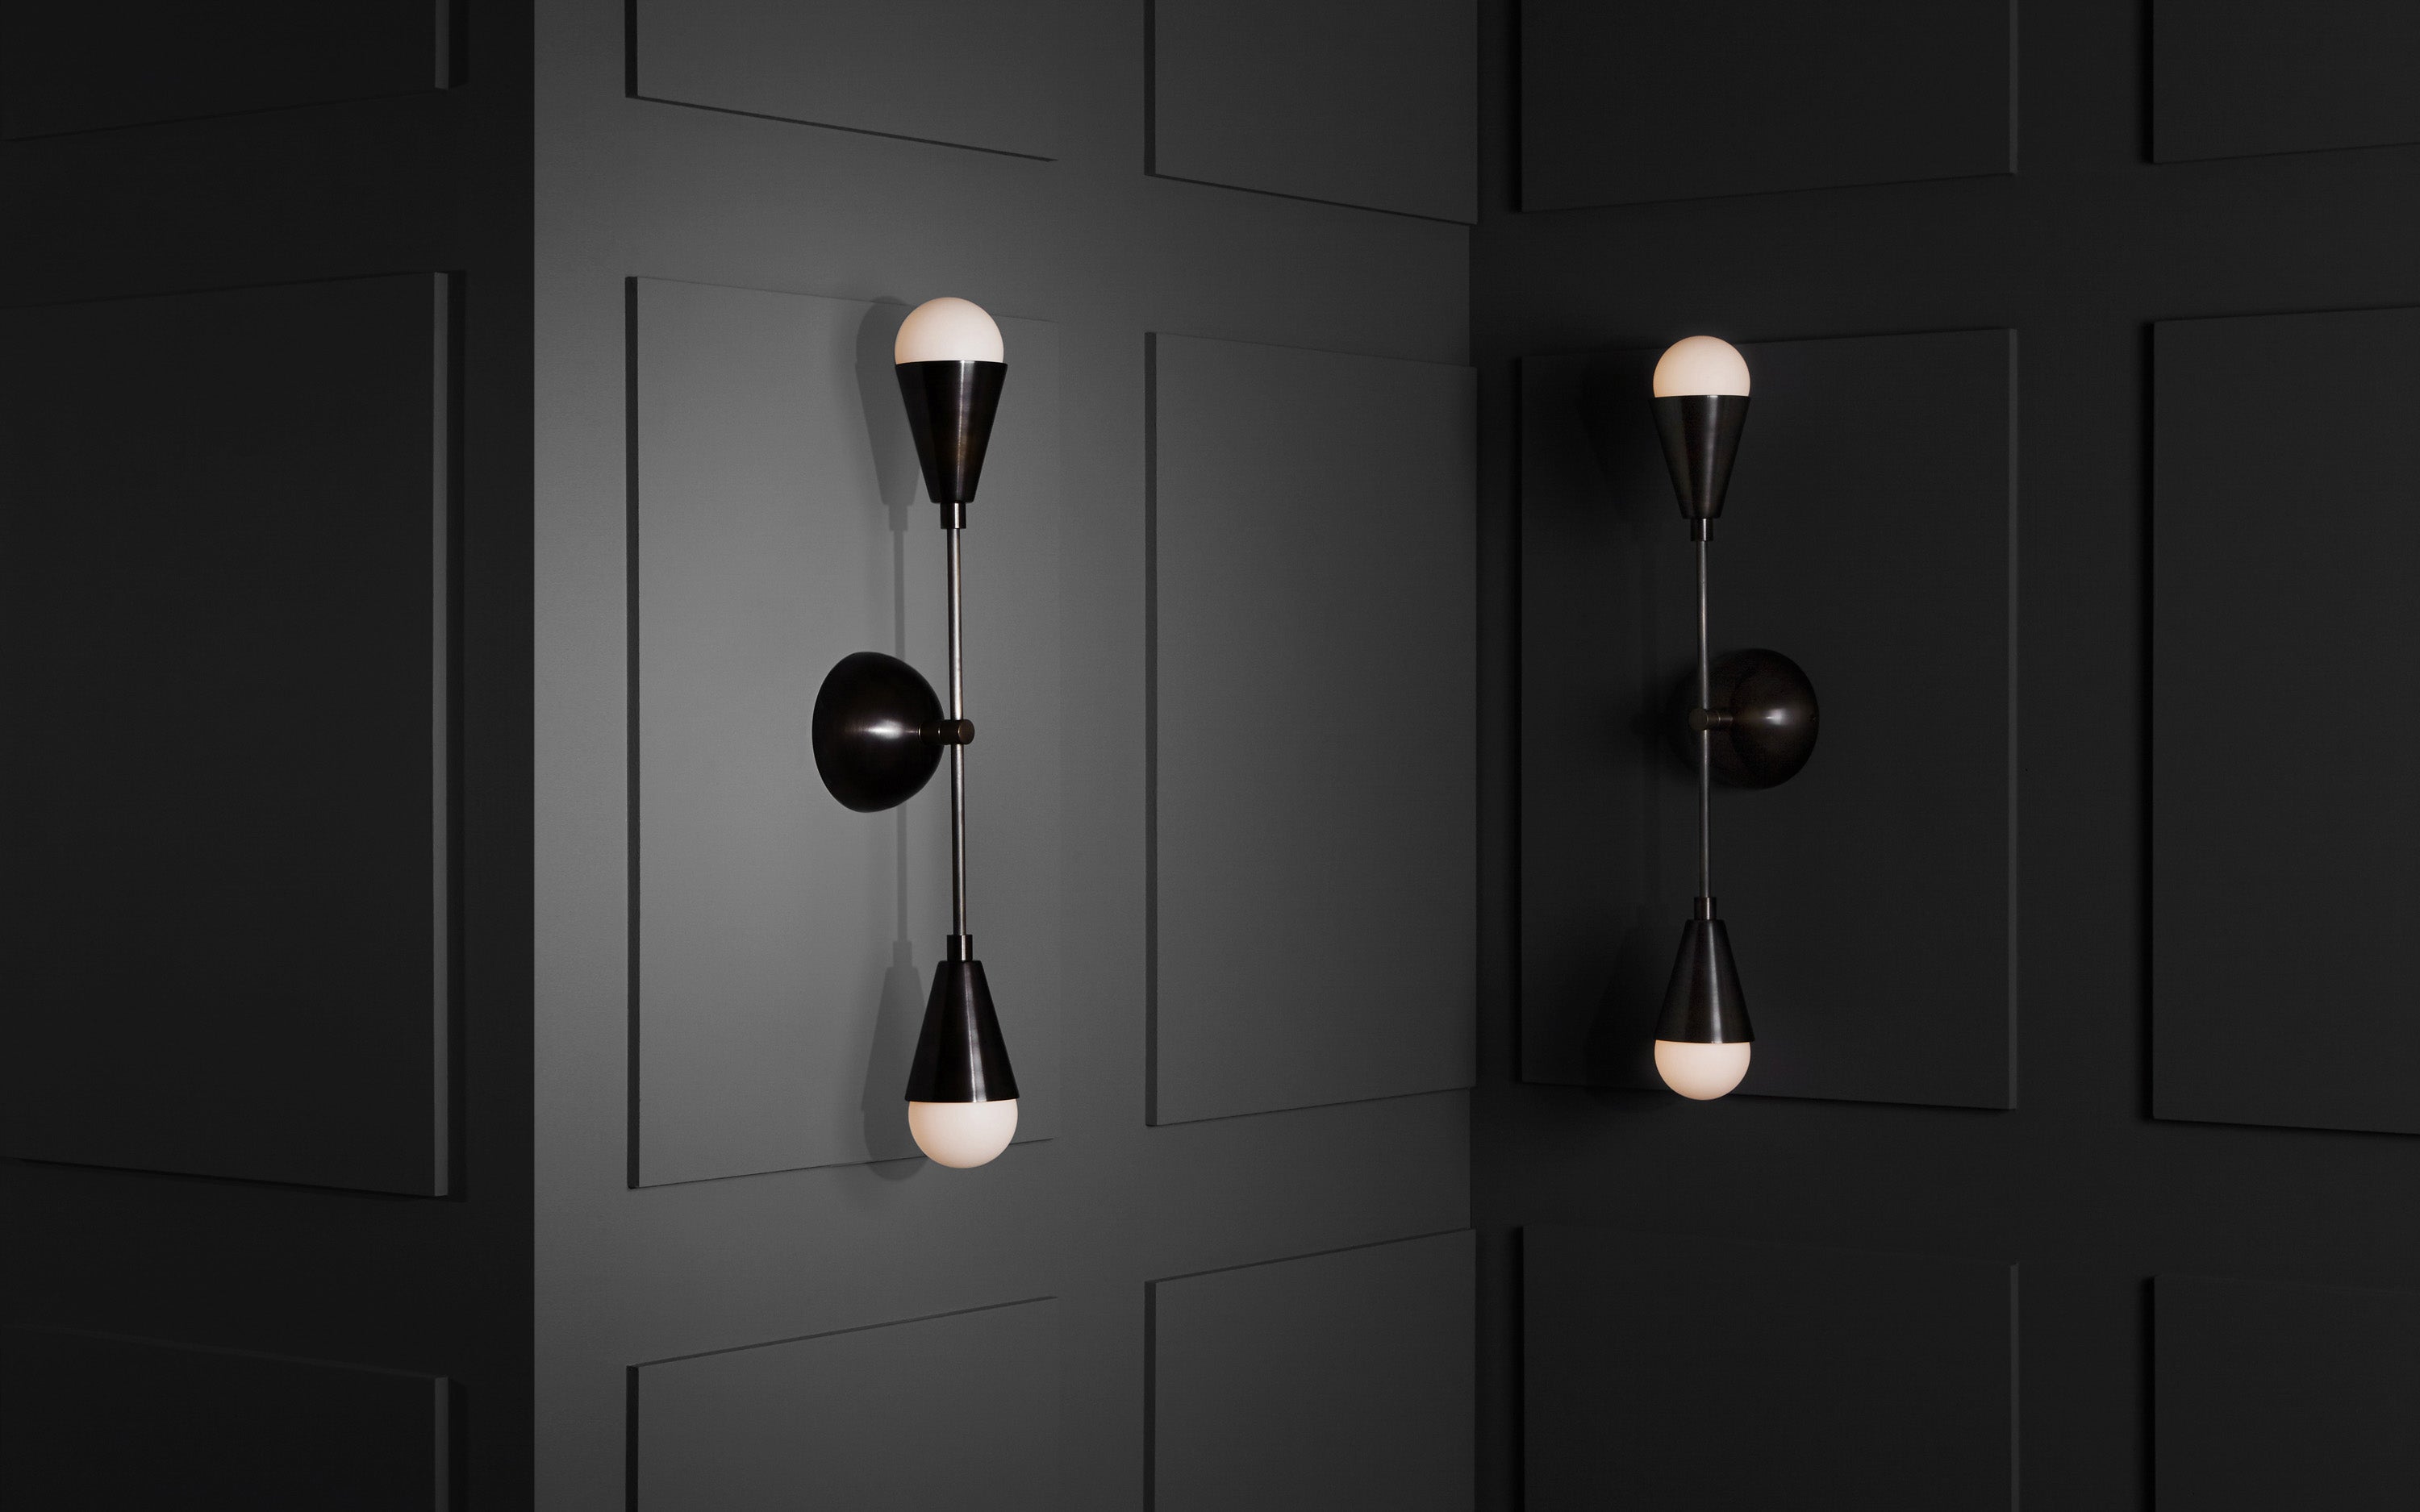 A pair of TRIAD : 2 sconces mounted vertically to a paneled wall. 